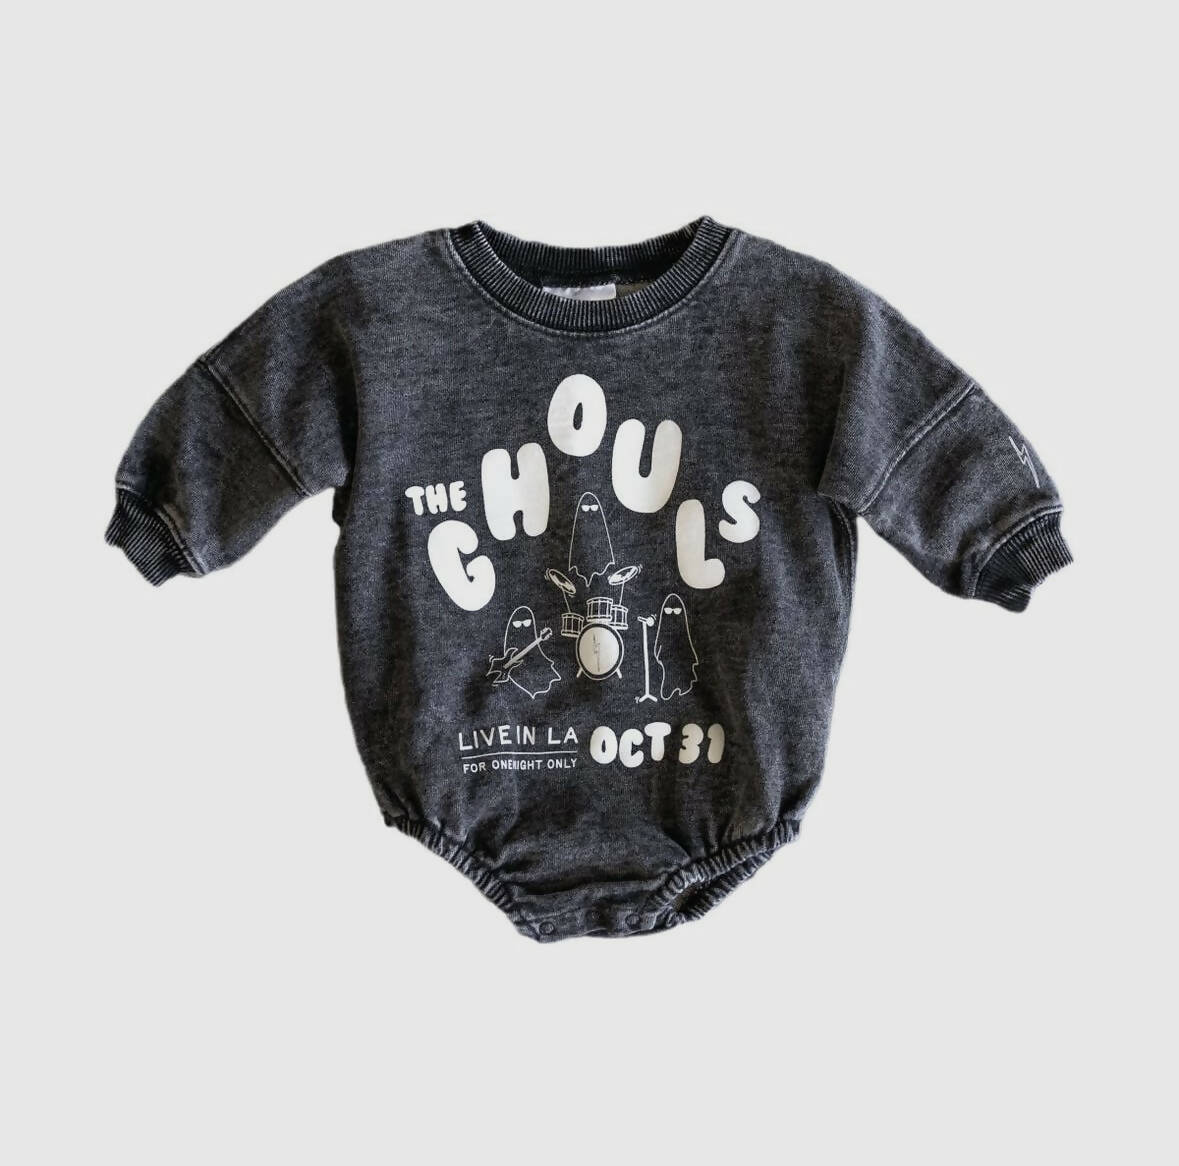 The Ghouls Band Pullover